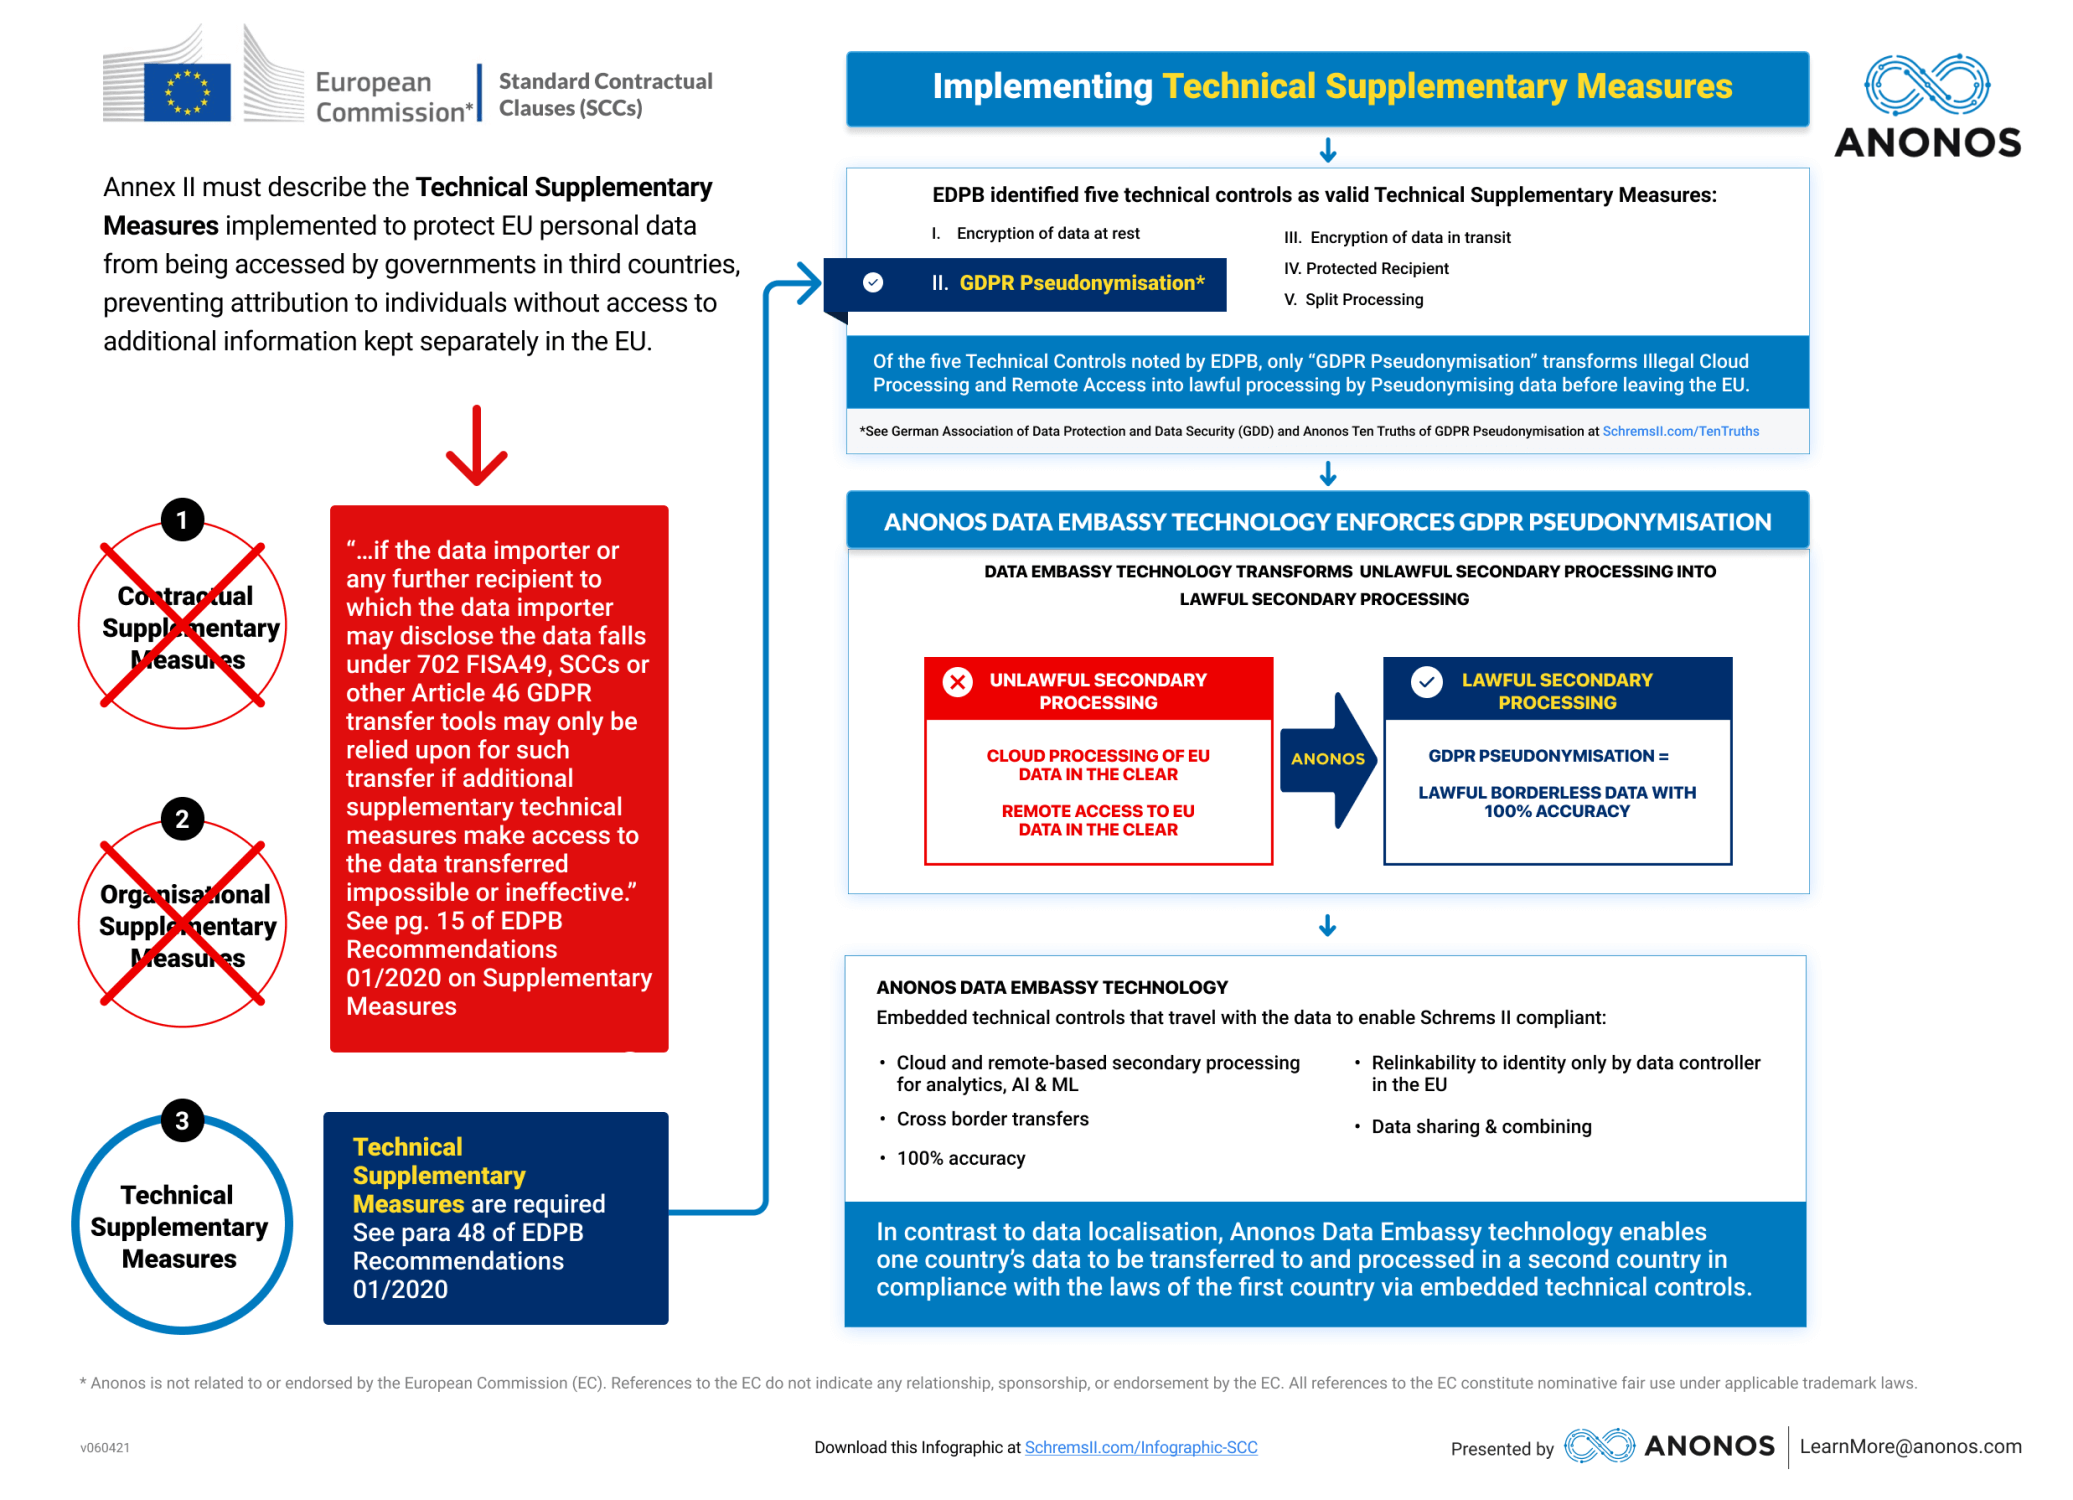 The following infographic provides information to help you comply with obligations to adopt 'surveillance proof' Schrems II Supplementary Measures using Anonos Data Embassy software satisfying GDPR state-of-the-art requirements for Pseudonymisation.